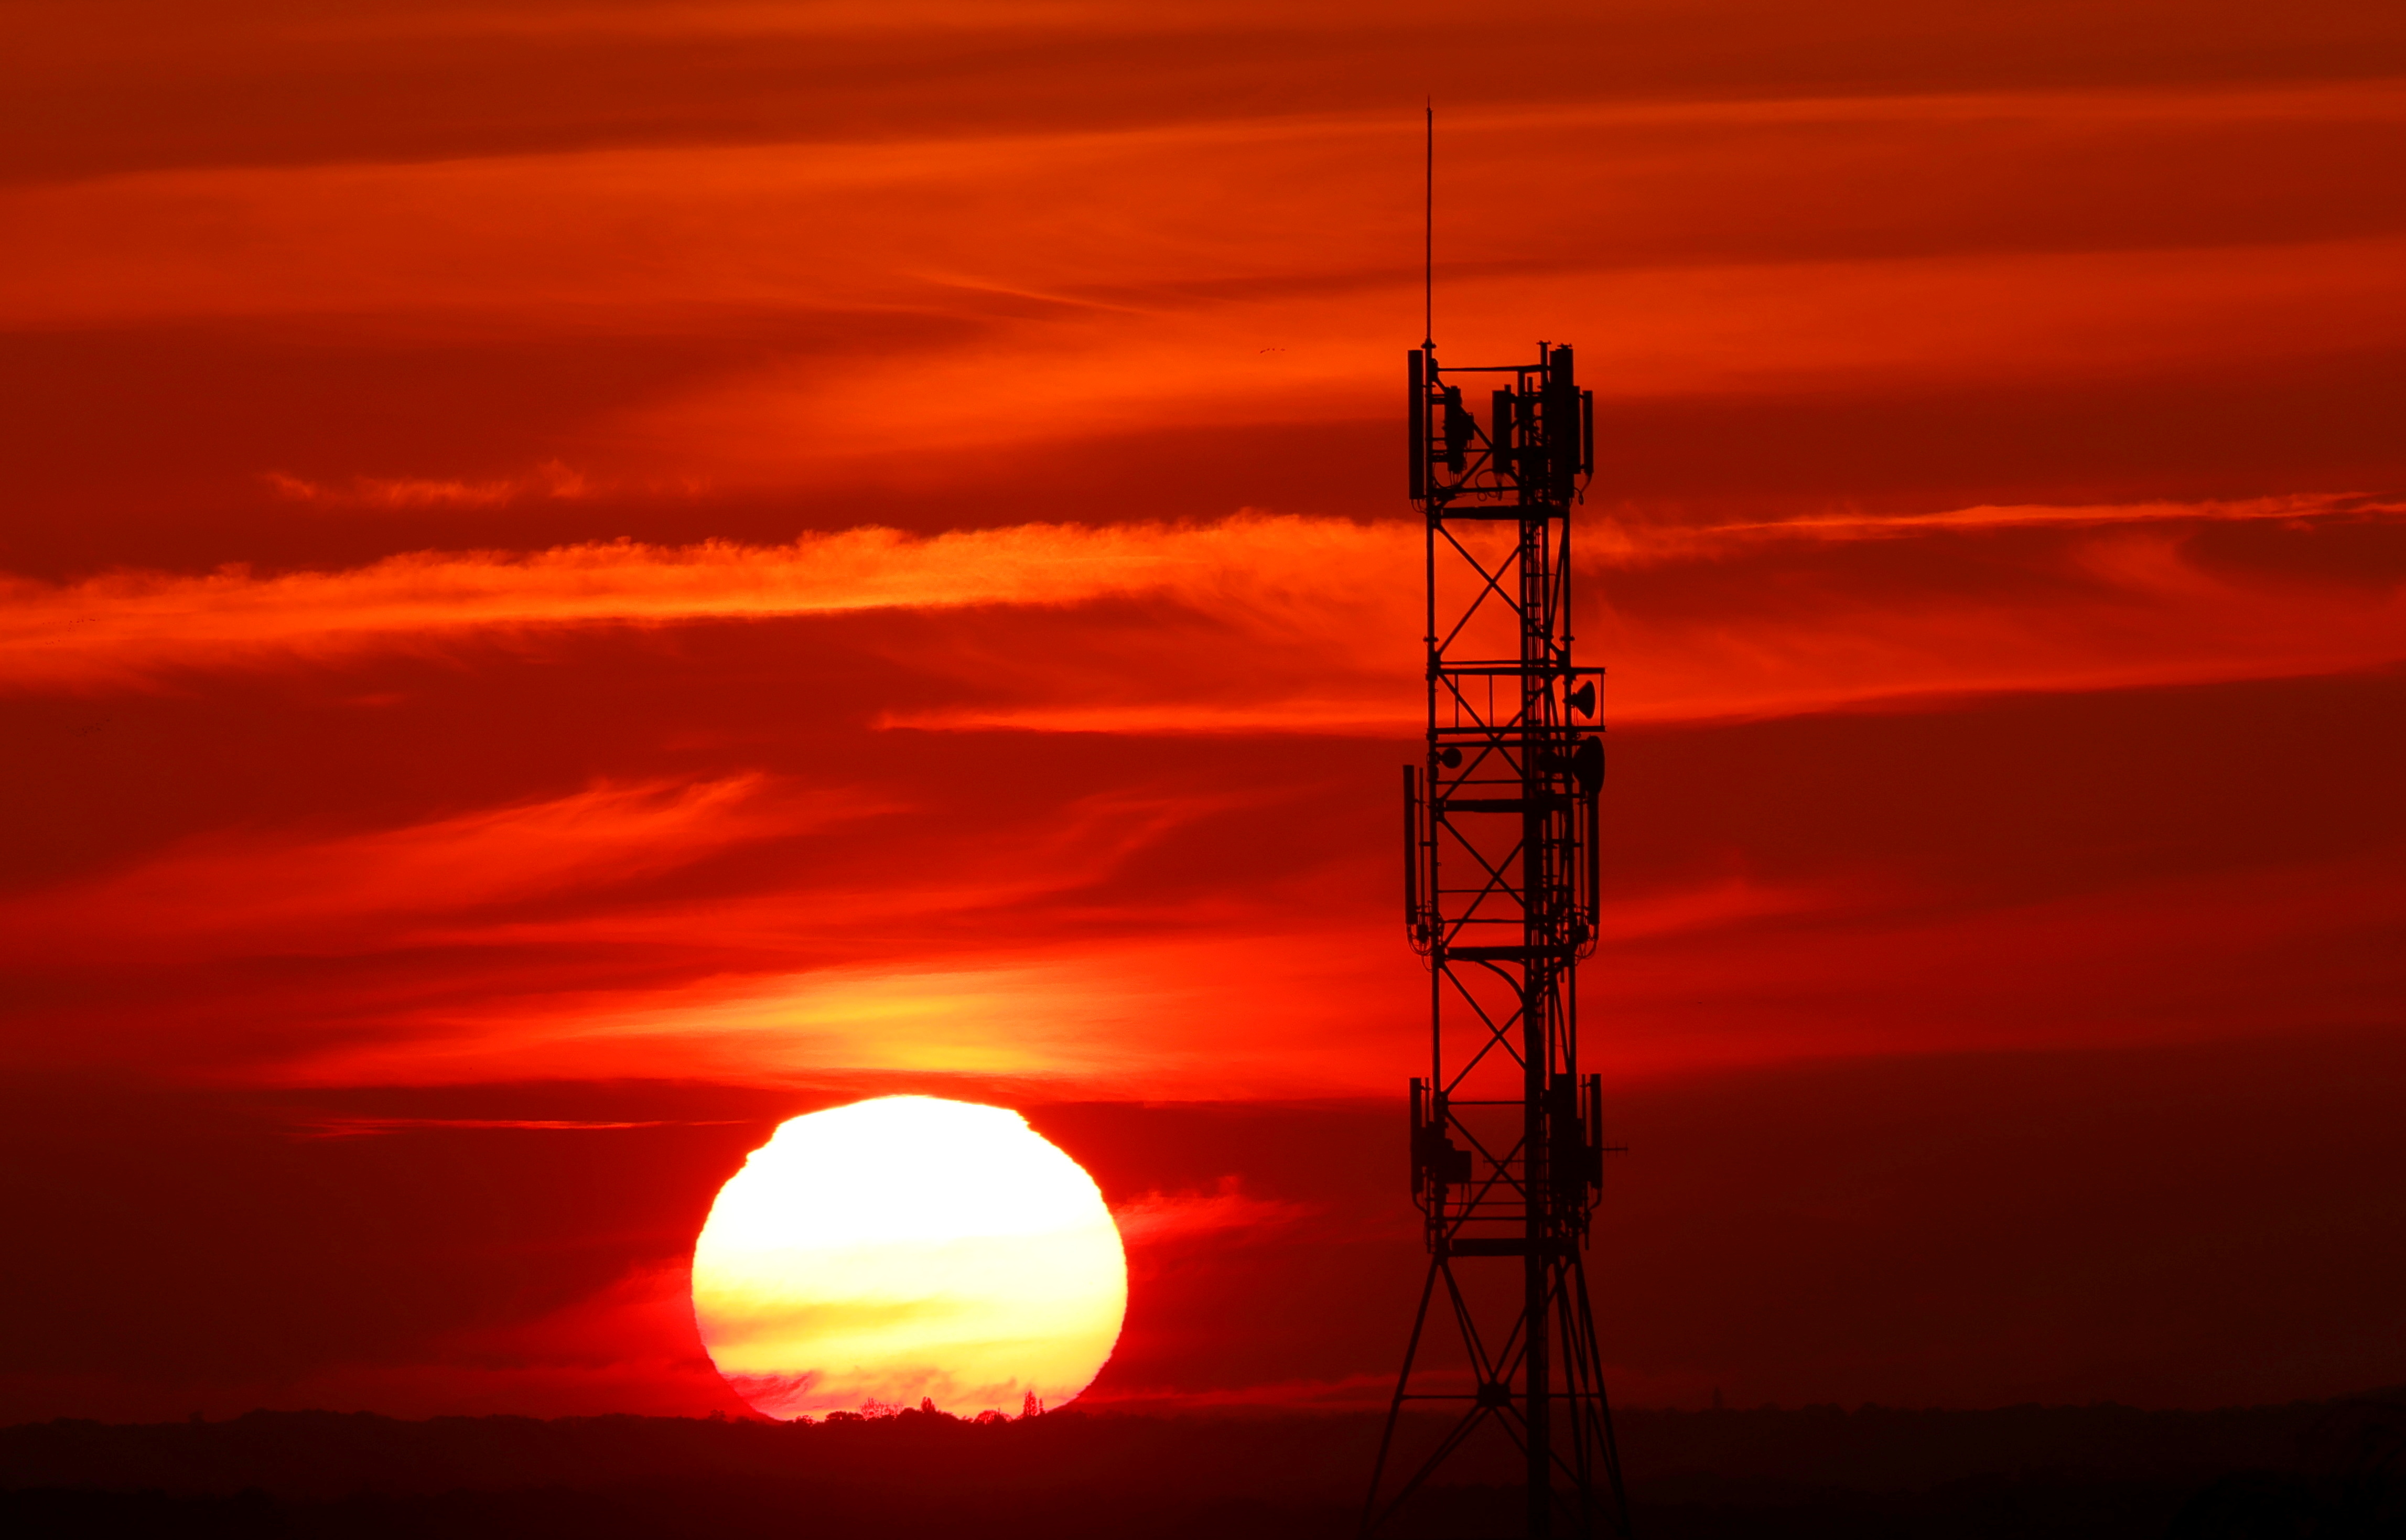 The sun sets behind transmitting antennas on a mobile-phone network relay mast in Vertou near Nantes France, November 10, 2021. REUTERS/Stephane Mahe